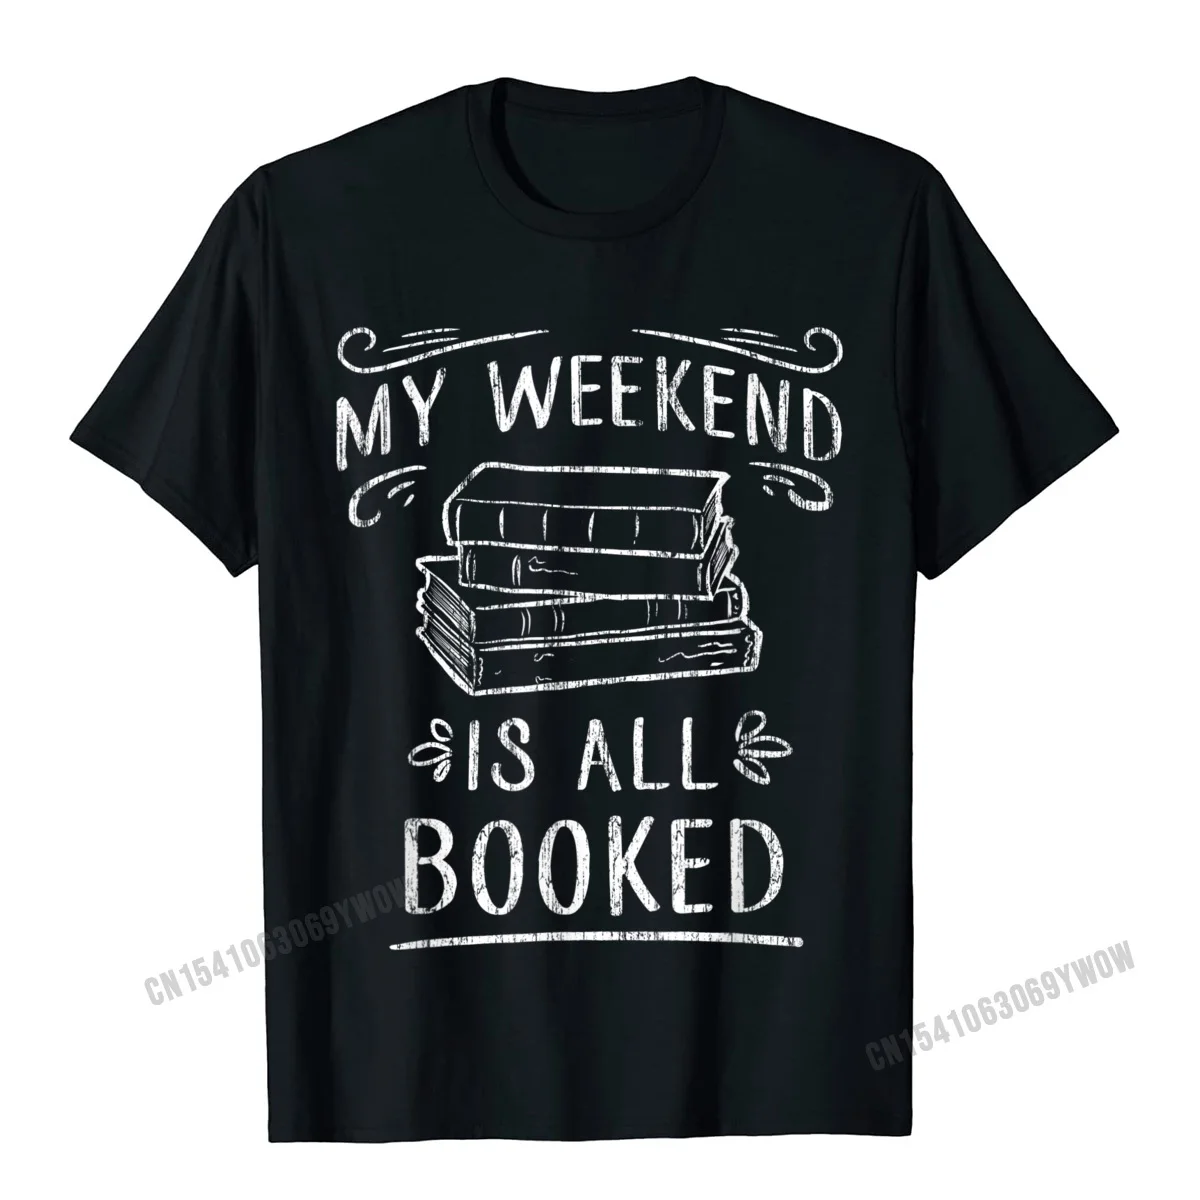 

My Weekend Is All Booked T Shirt - Funny Book Lover Tshirt Camisas Men Normal Design Tops T Shirt Rife Cotton Men's Tshirts